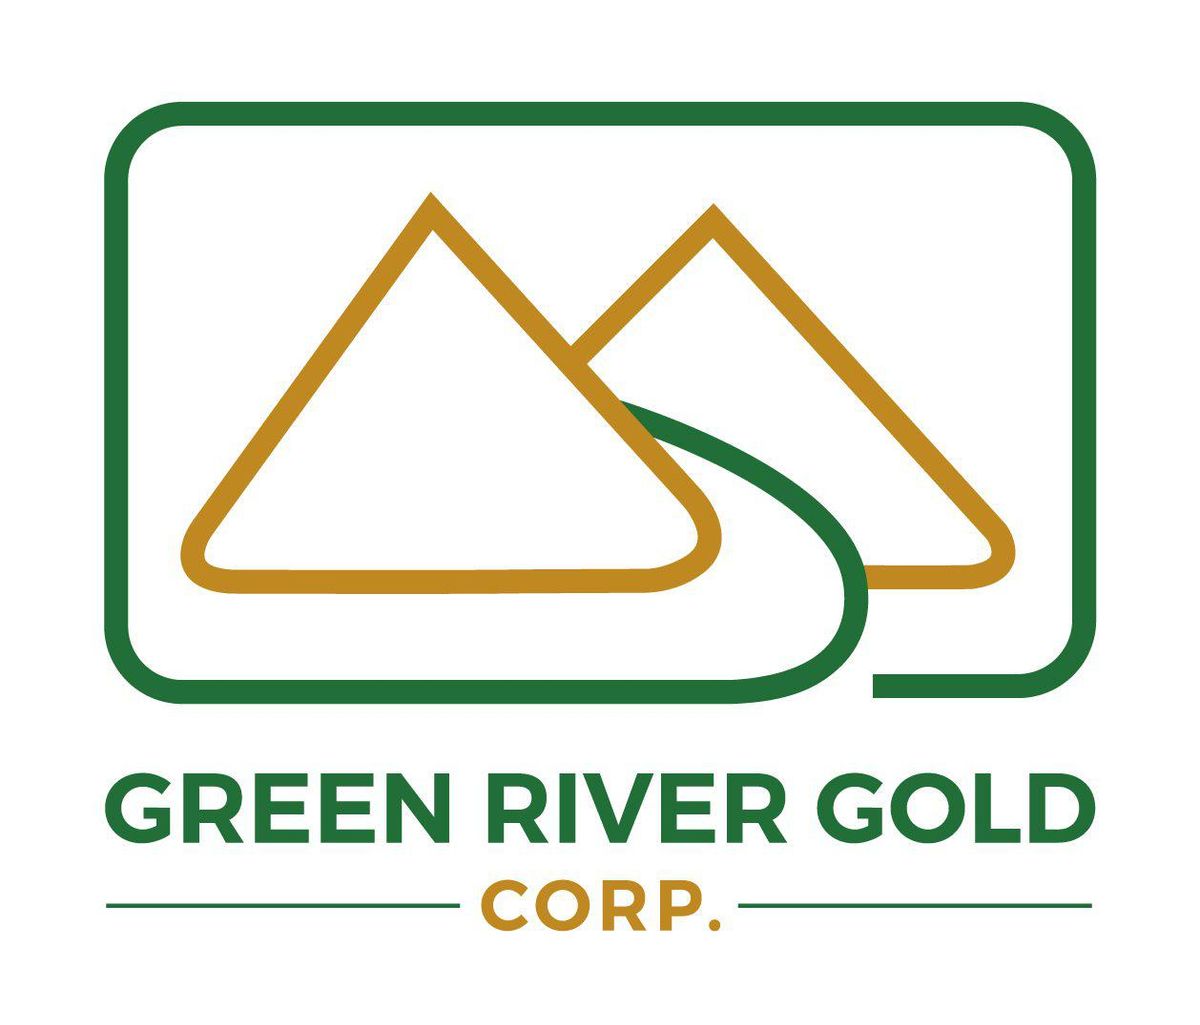 Green River Gold Corp. Intercepts Highest XRF Nickel Results to Date in Step-Out Drilling at Its Quesnel Nickel/Magnesium/Talc and Expands Its Oversubscribed Flow-Through Share Offering